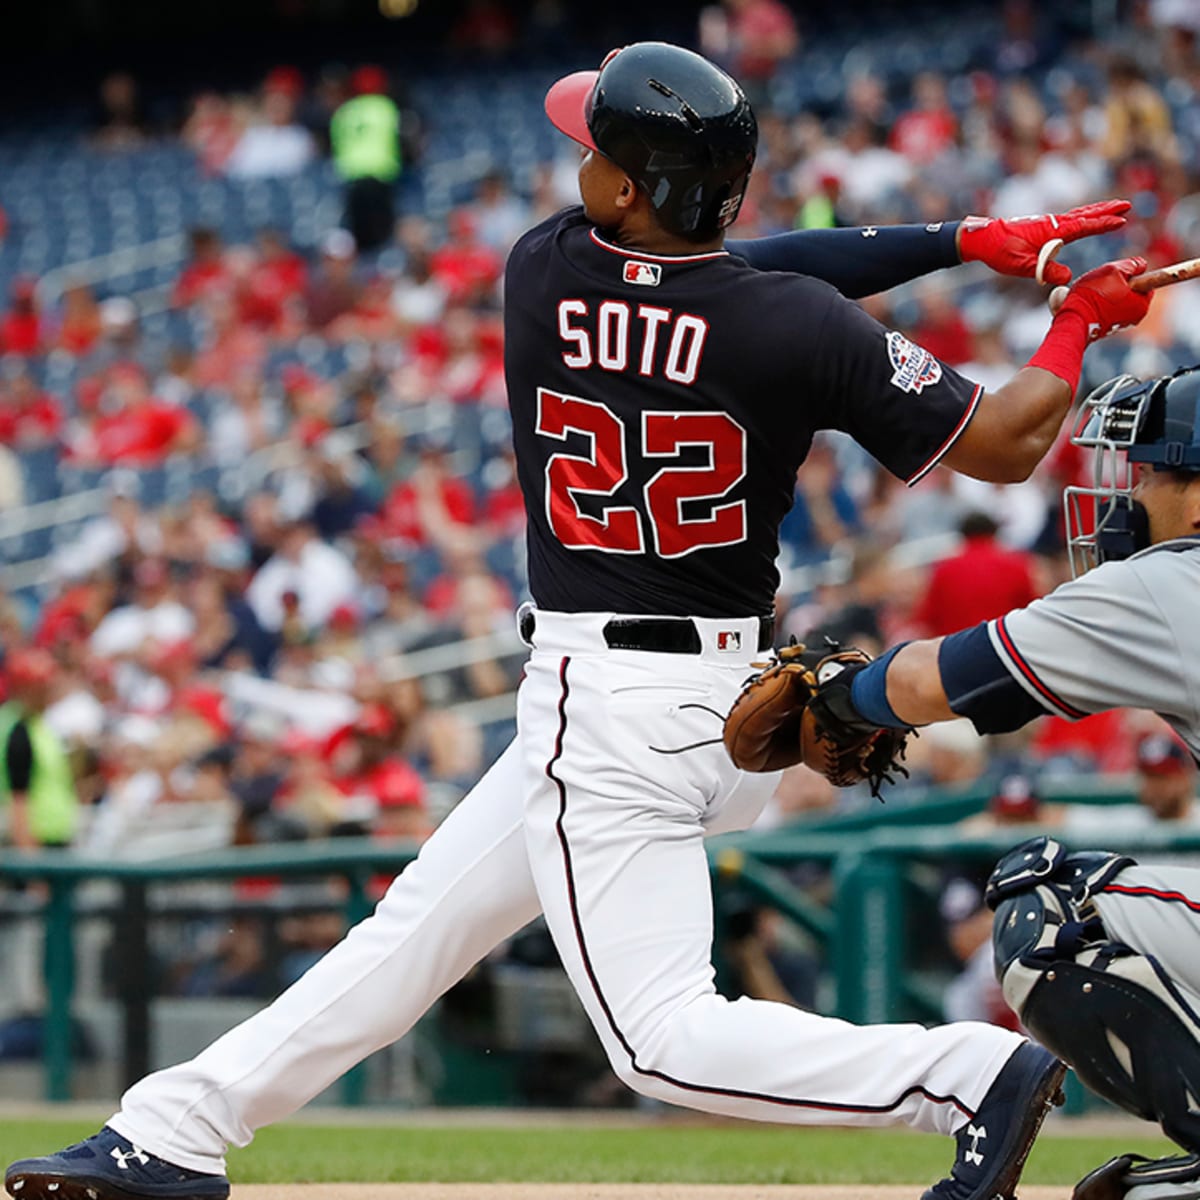 Houston has a problem and his name is Juan Soto.